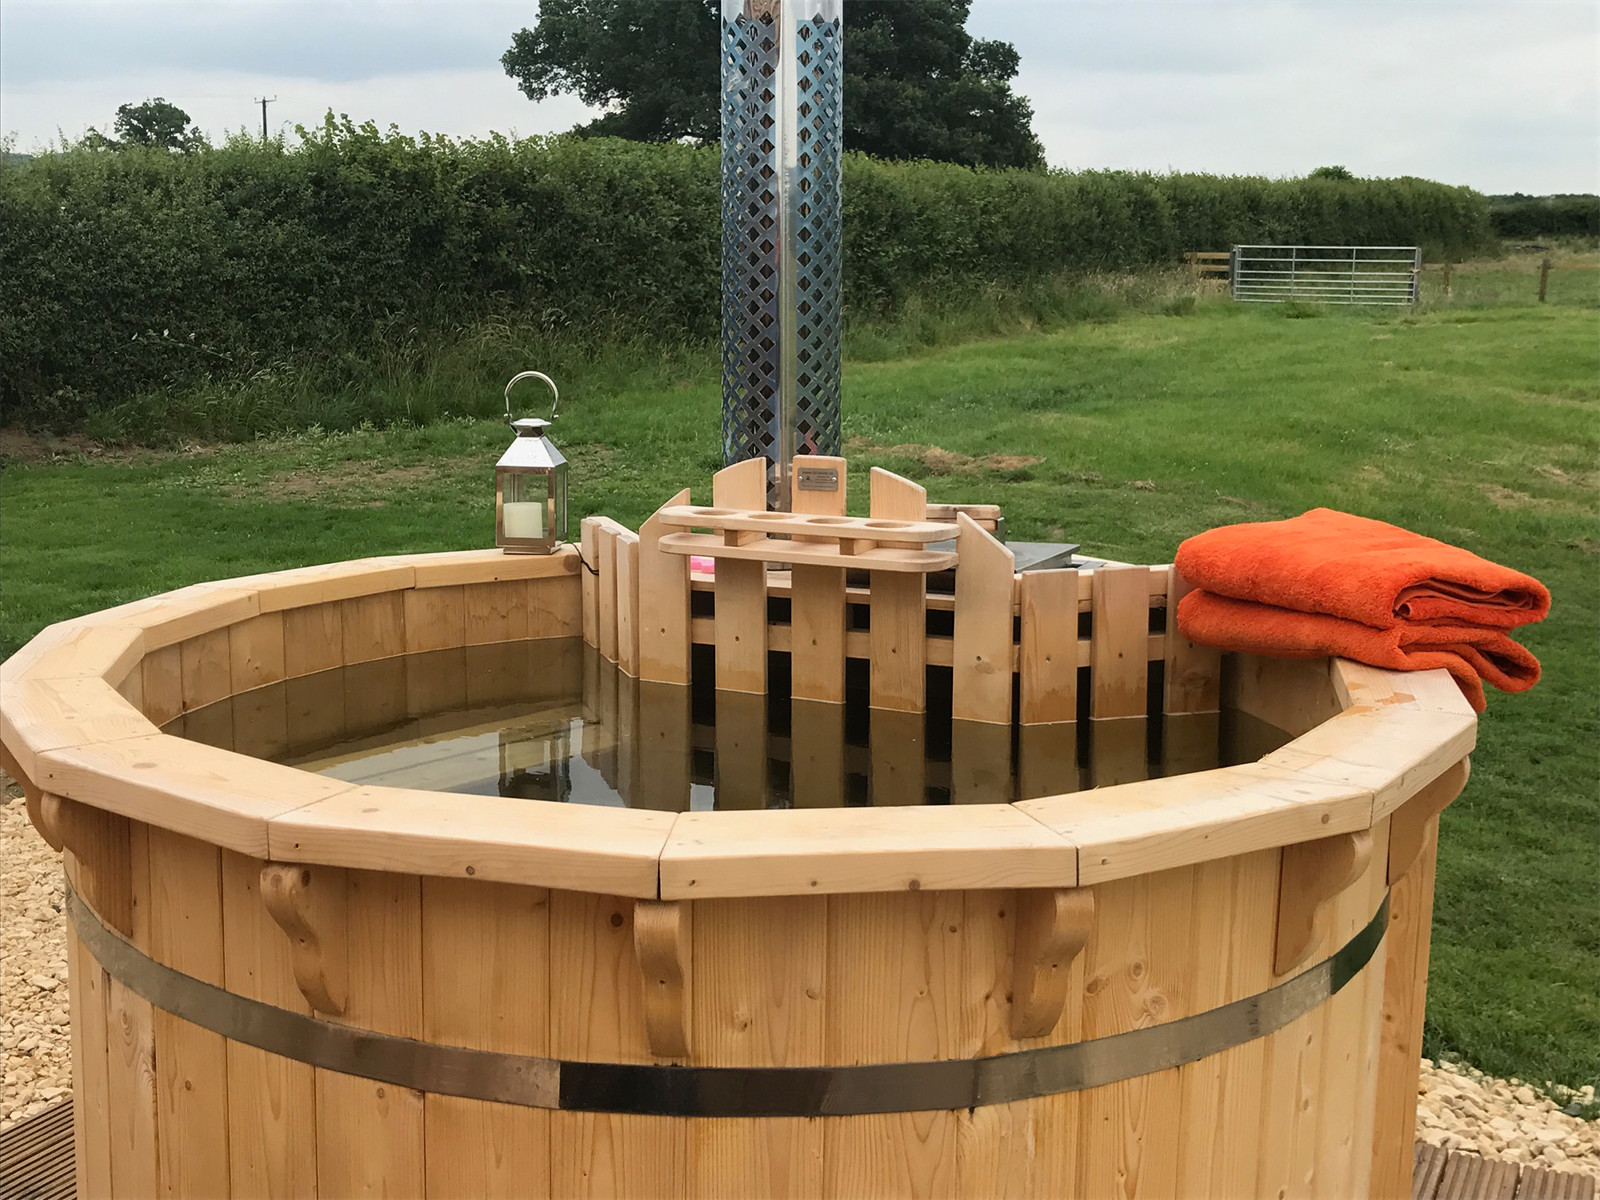 Luxury glamping pods with wood fired hot tubs at Evenlode Grounds Farm